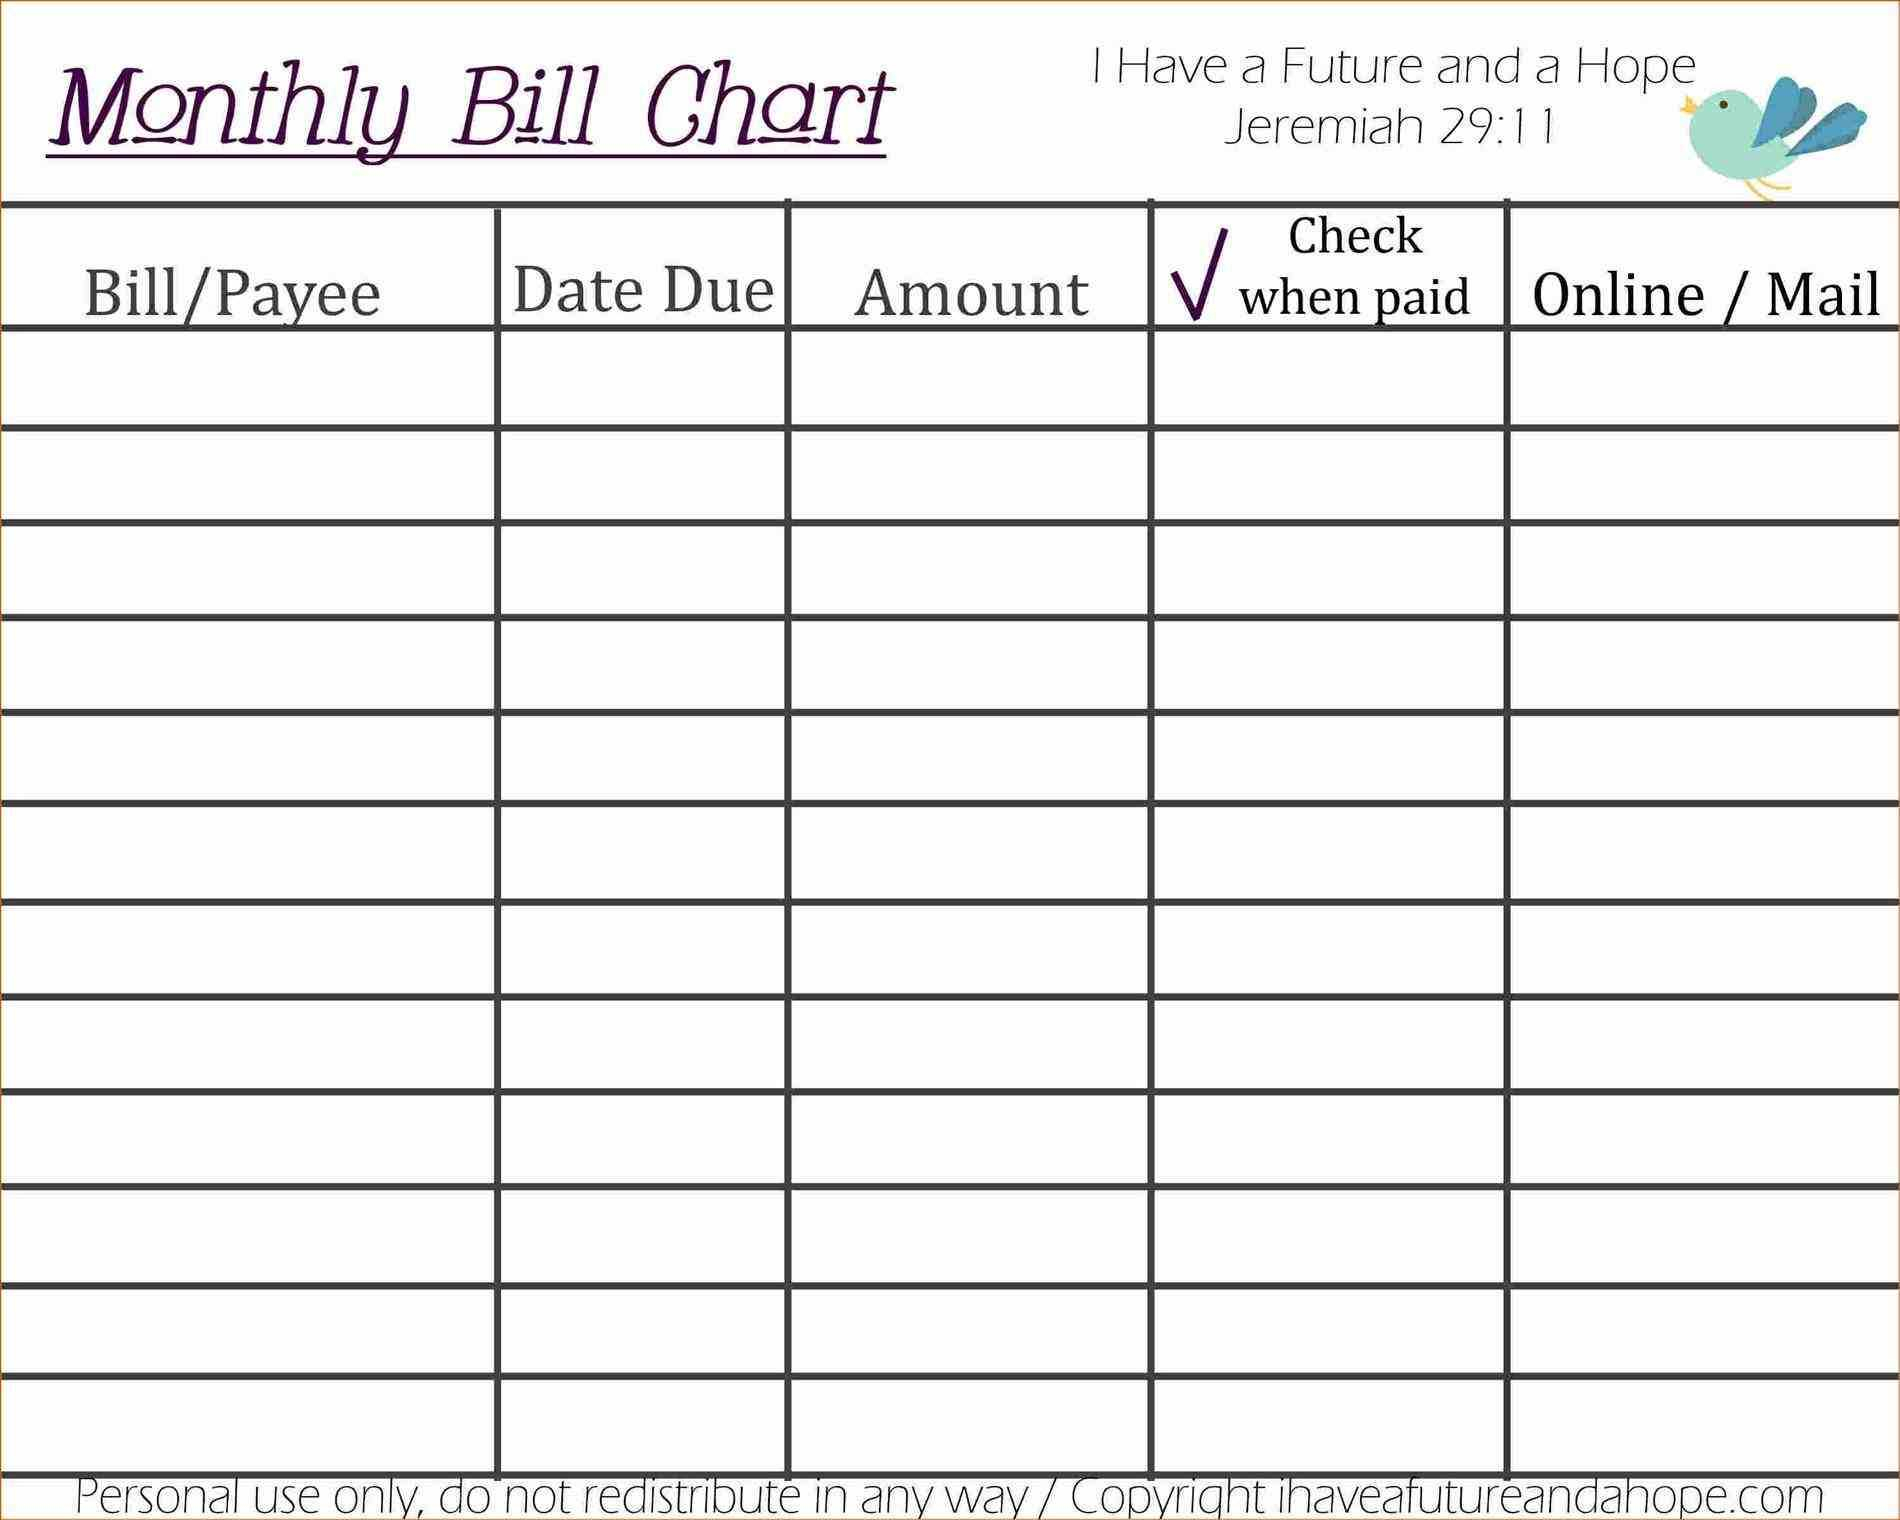 Spreadsheets To Help Manage Money | Sosfuer Spreadsheet In Spreadsheets To Help Manage Money